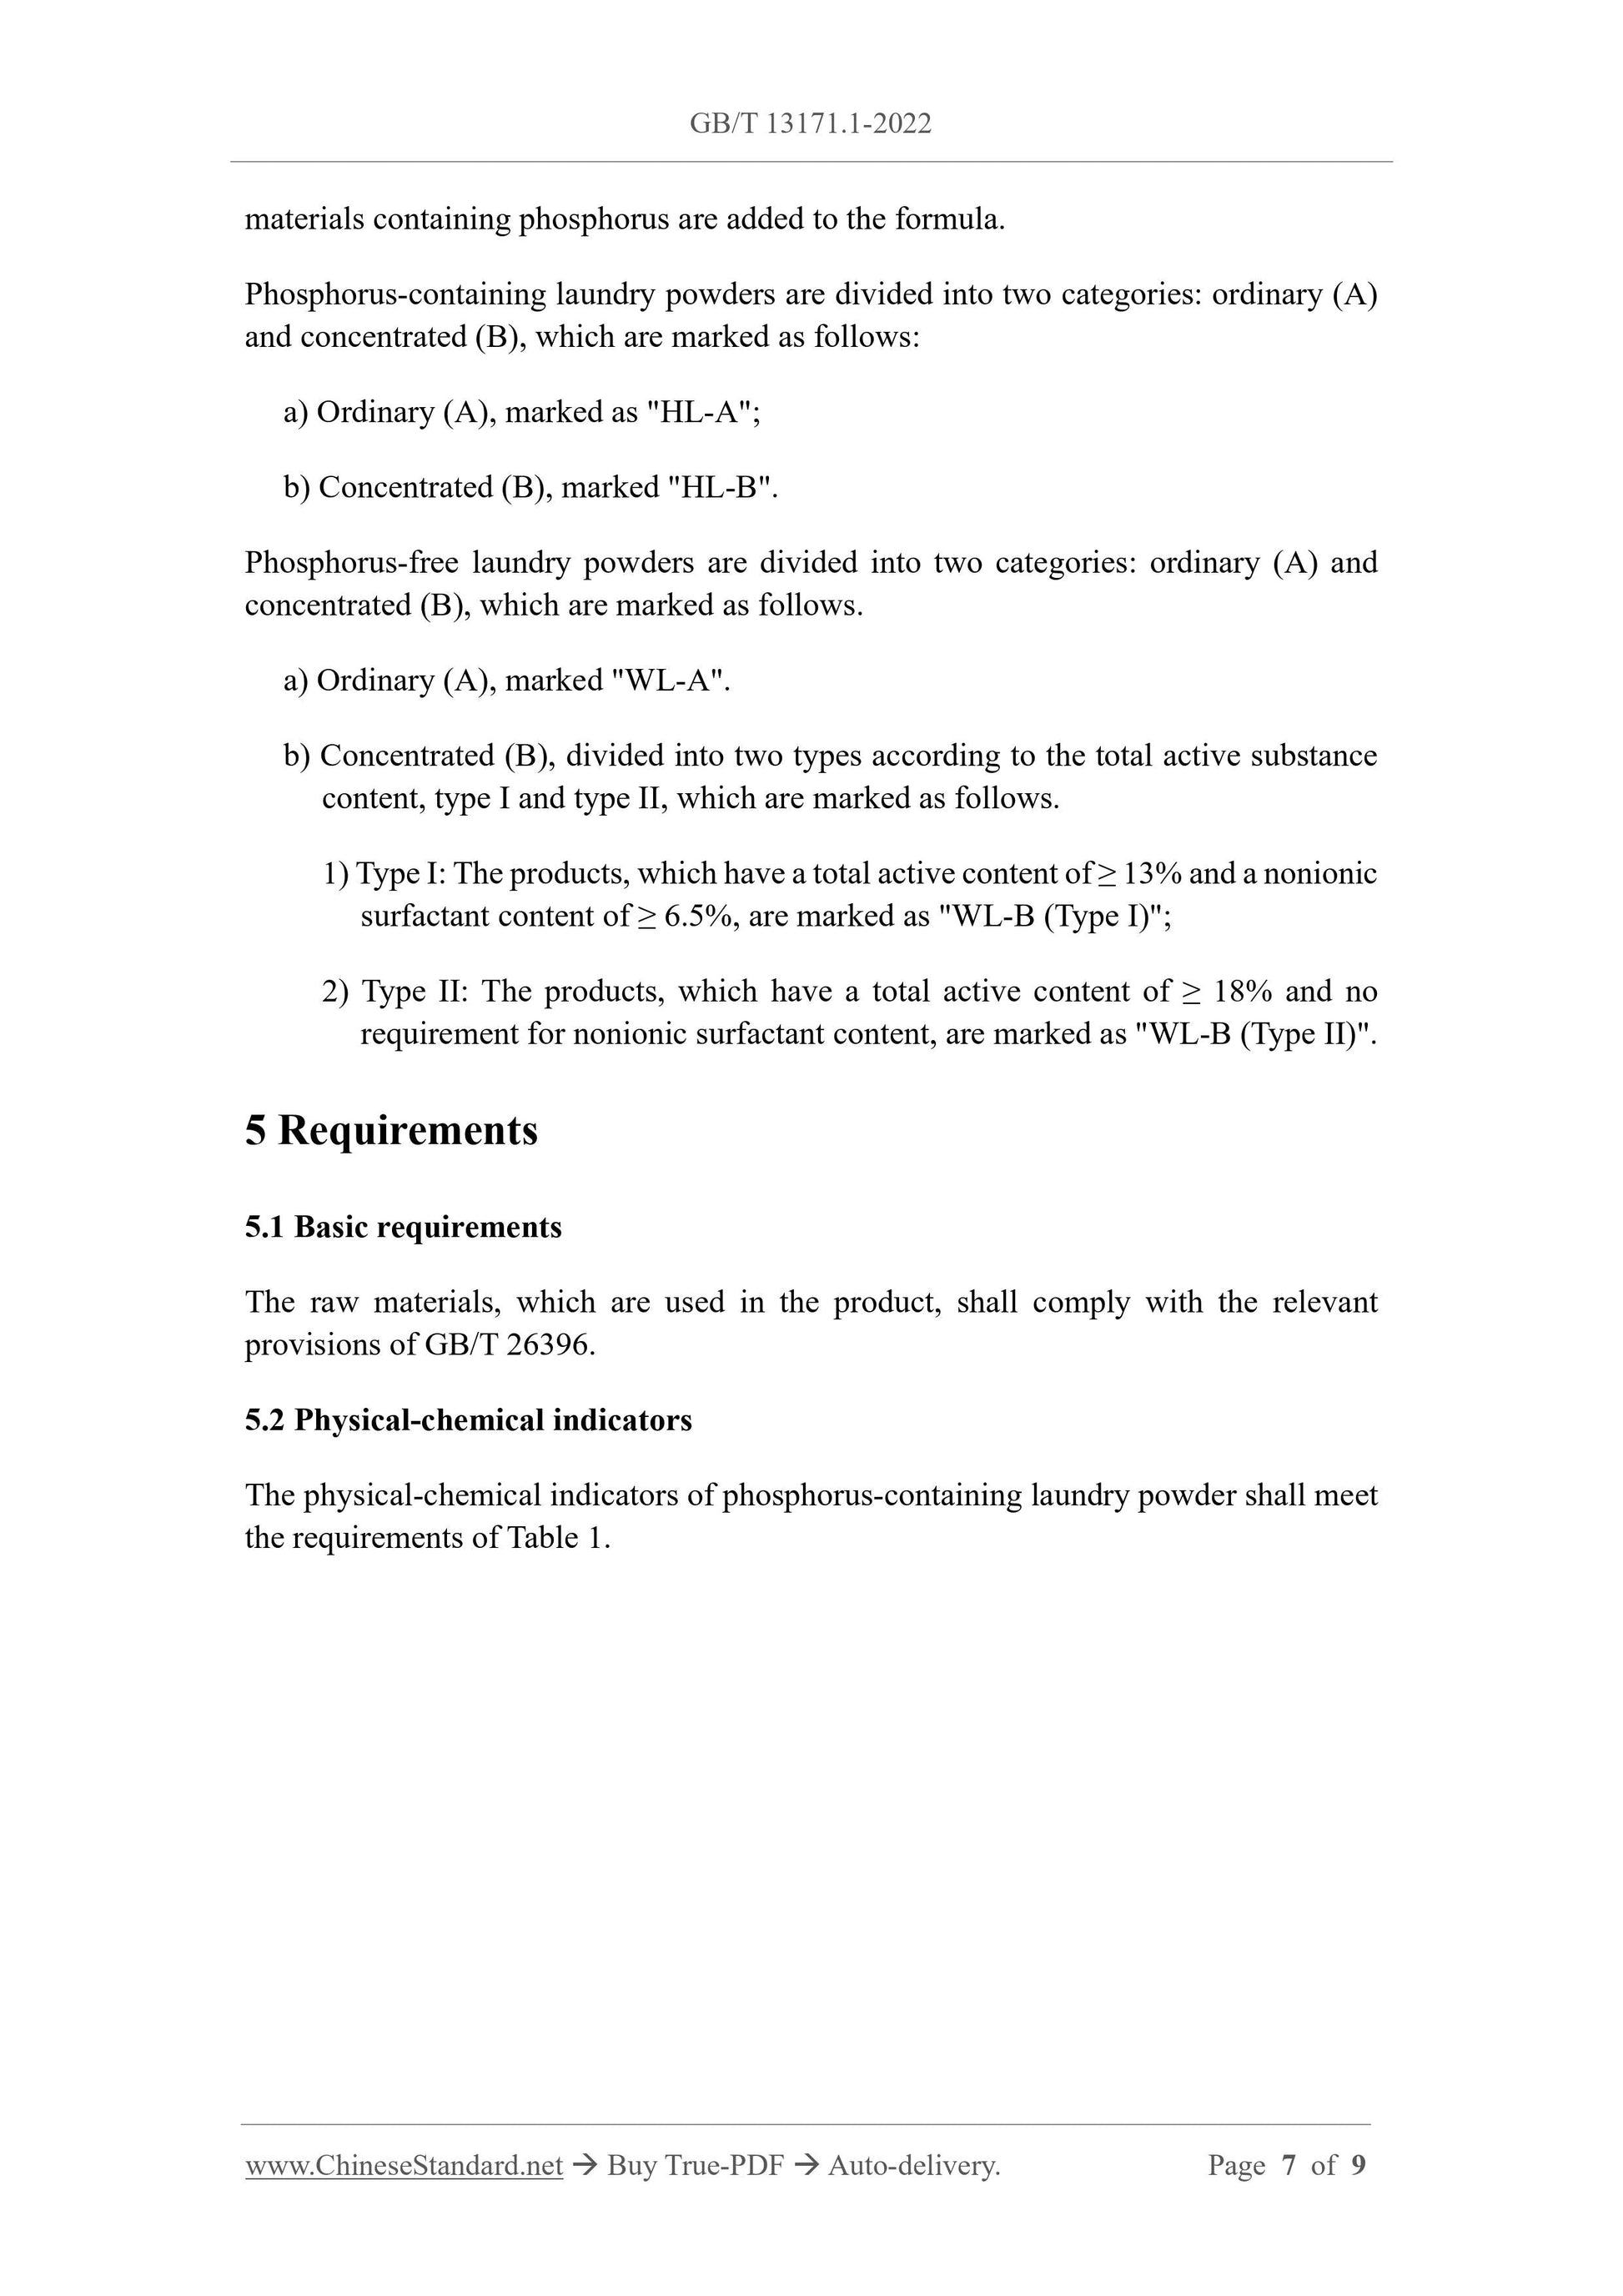 GB/T 13171.1-2022 Page 4